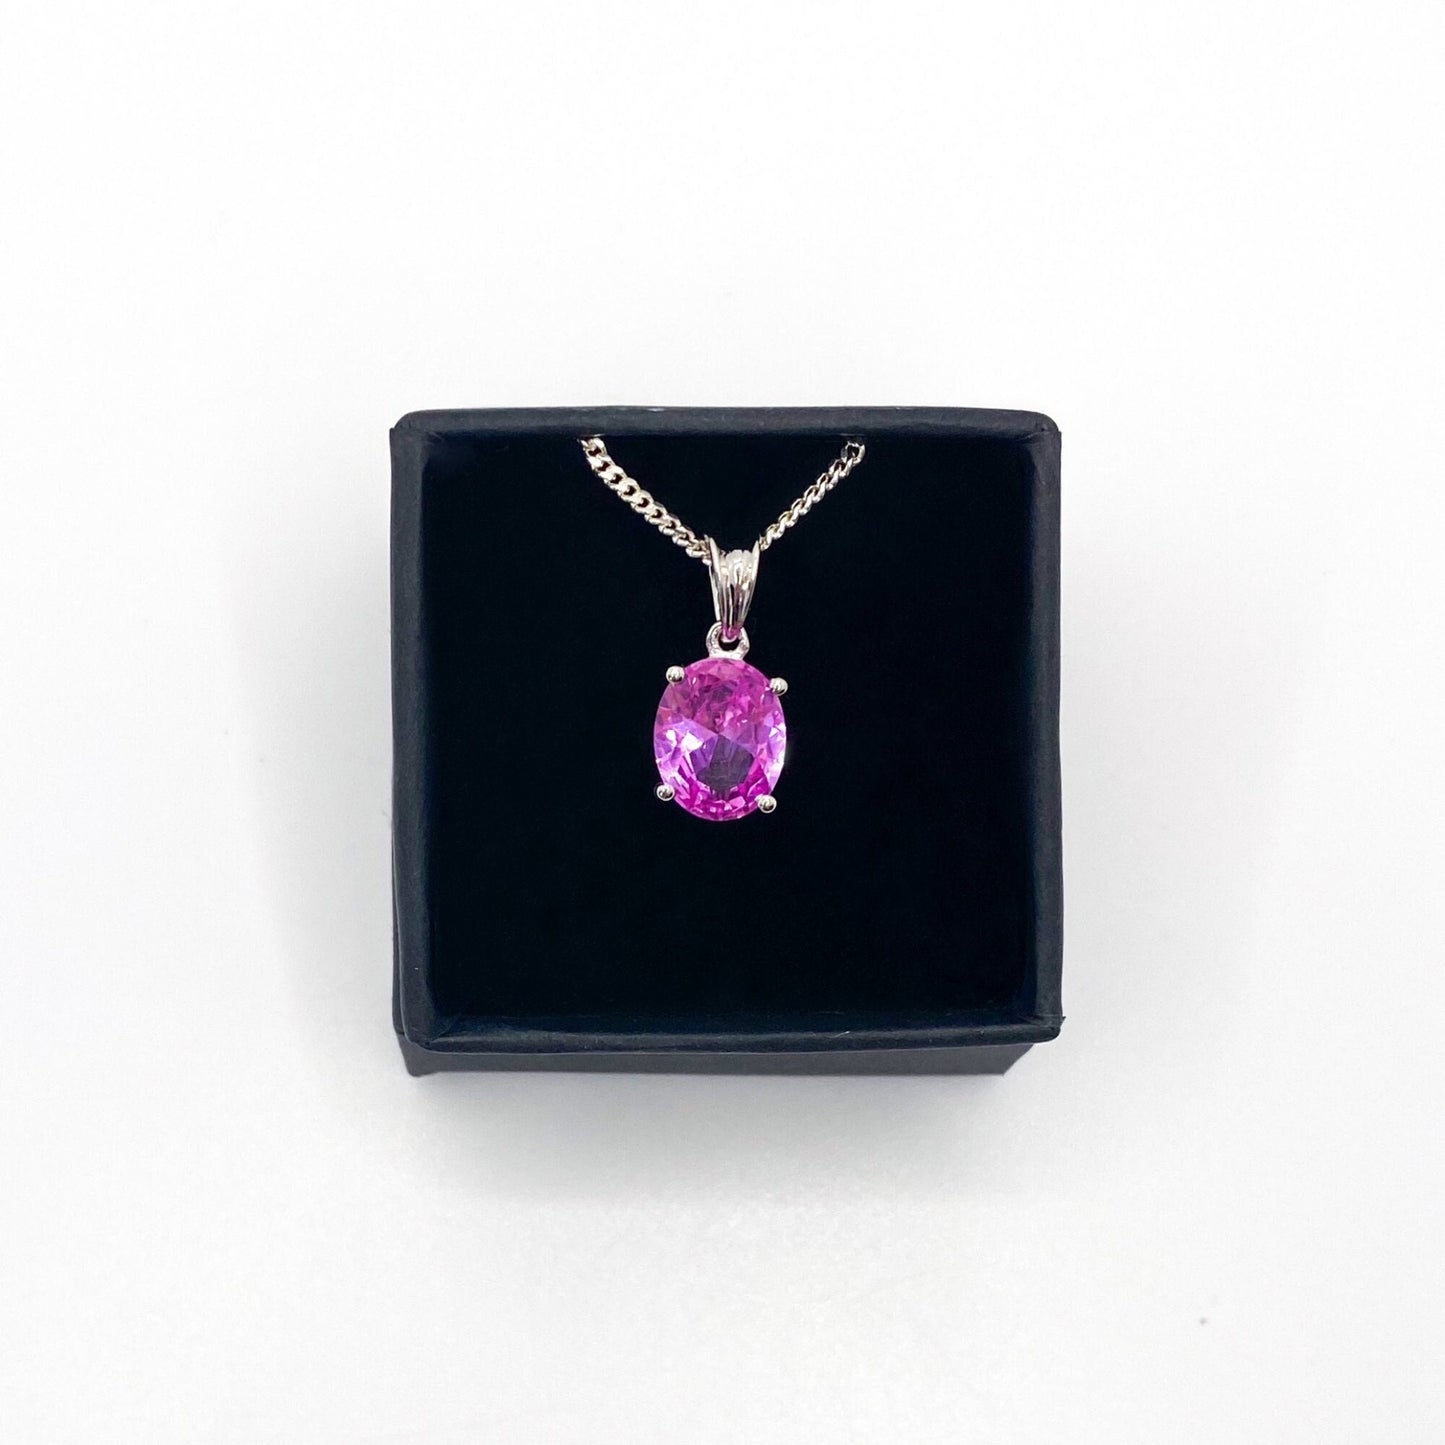 Pink Sapphire necklace, sterling silver